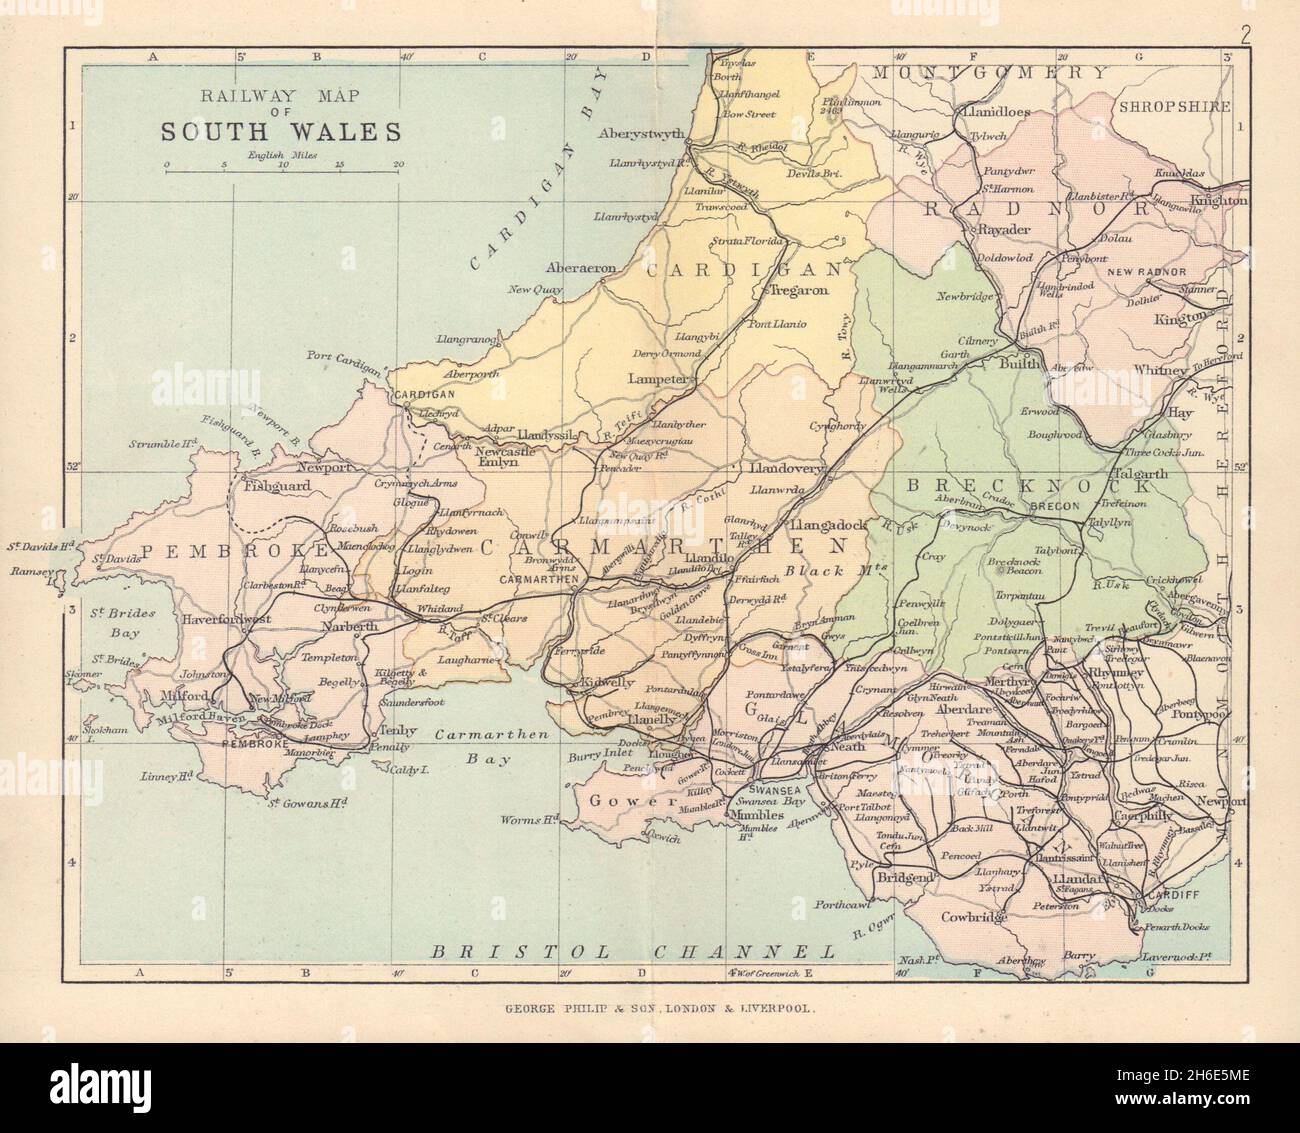 WALES Railway Map of South Wales BARTHOLOMEW 1890 old antique plan chart Stock Photo